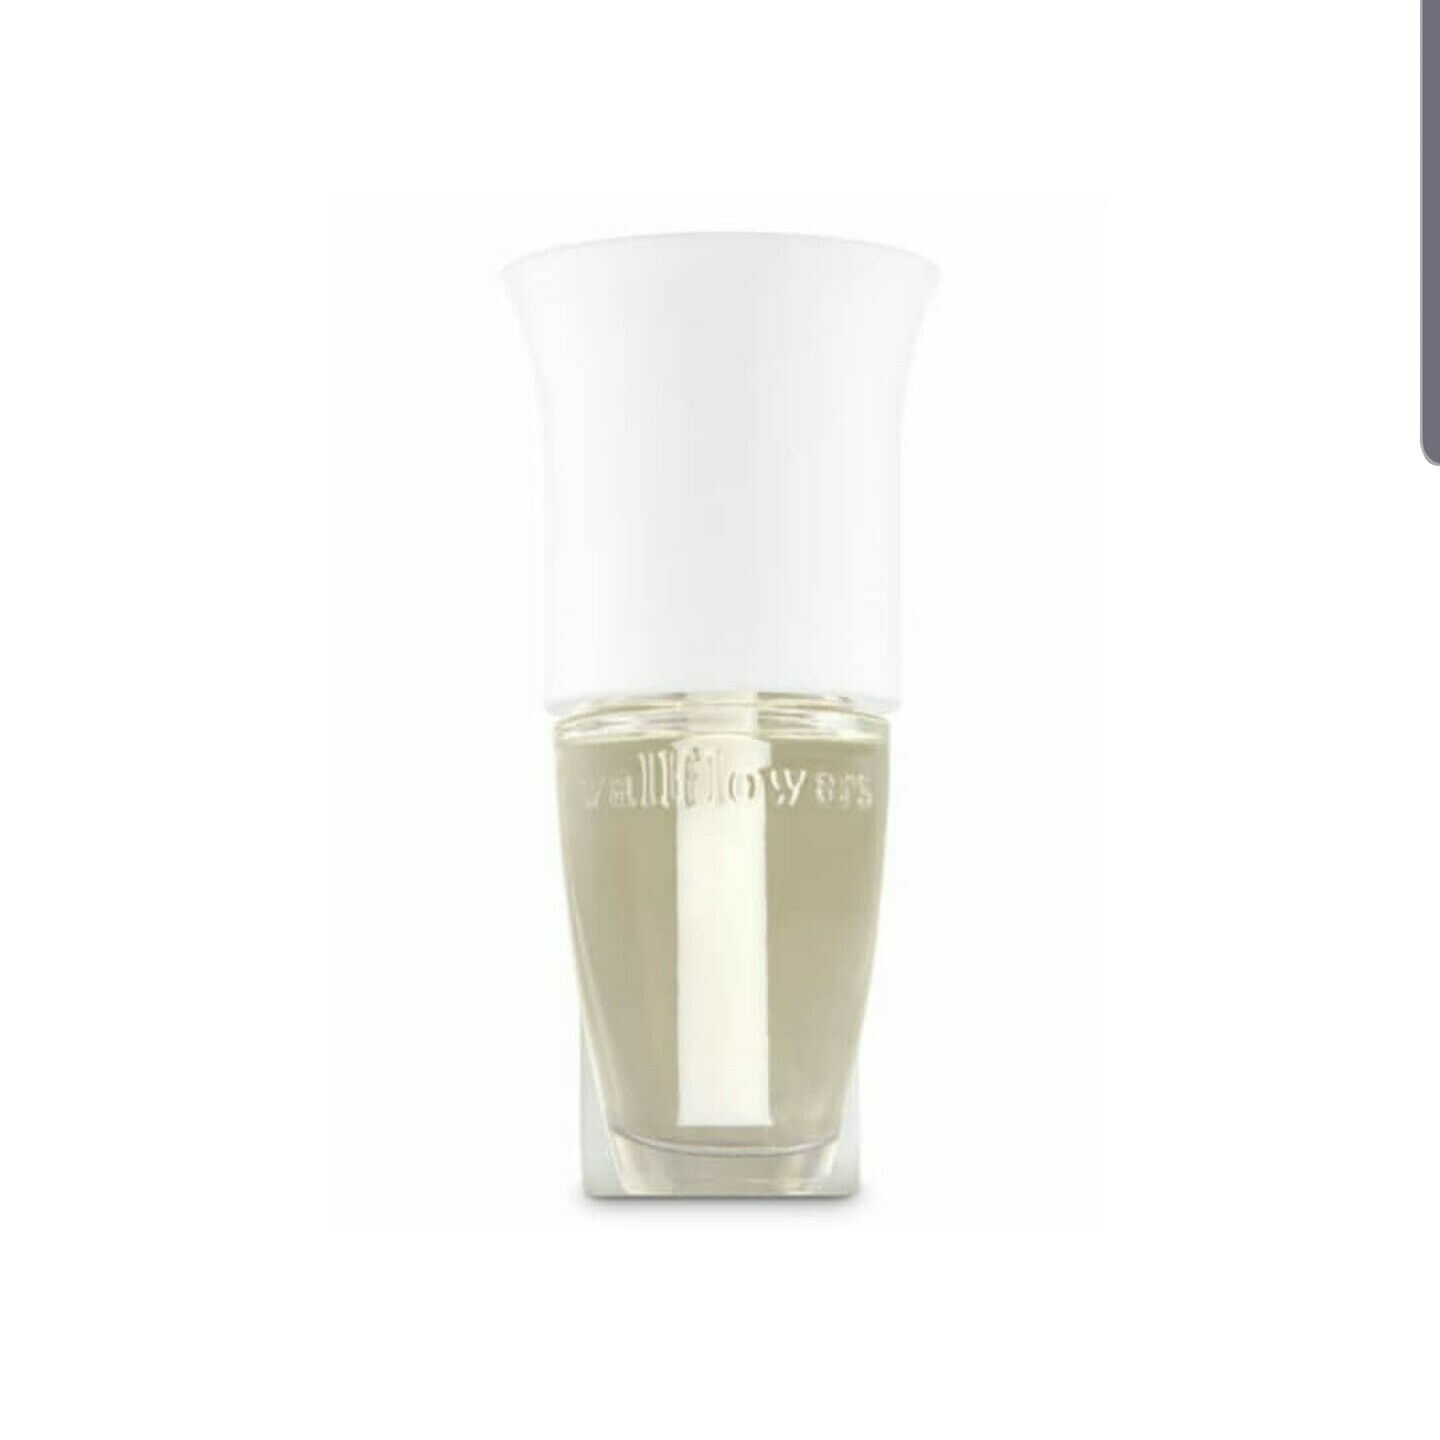 Bath and body works White Flare 